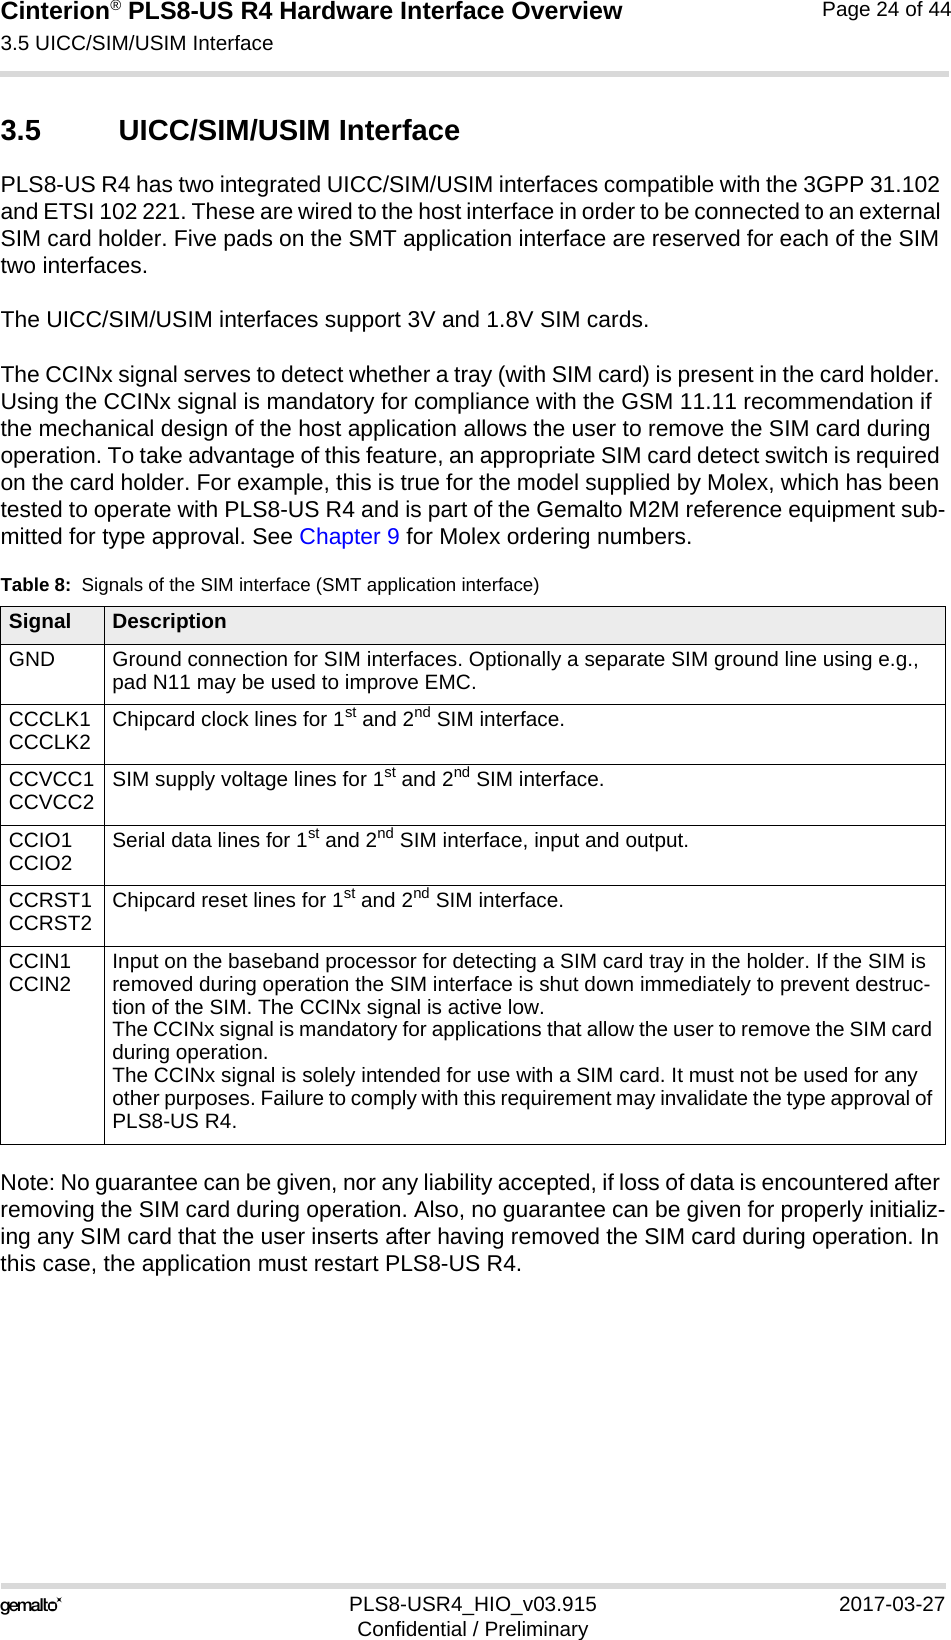 Cinterion® PLS8-US R4 Hardware Interface Overview3.5 UICC/SIM/USIM Interface27PLS8-USR4_HIO_v03.915 2017-03-27Confidential / PreliminaryPage 24 of 443.5 UICC/SIM/USIM InterfacePLS8-US R4 has two integrated UICC/SIM/USIM interfaces compatible with the 3GPP 31.102 and ETSI 102 221. These are wired to the host interface in order to be connected to an external SIM card holder. Five pads on the SMT application interface are reserved for each of the SIM two interfaces. The UICC/SIM/USIM interfaces support 3V and 1.8V SIM cards. The CCINx signal serves to detect whether a tray (with SIM card) is present in the card holder. Using the CCINx signal is mandatory for compliance with the GSM 11.11 recommendation if the mechanical design of the host application allows the user to remove the SIM card during operation. To take advantage of this feature, an appropriate SIM card detect switch is required on the card holder. For example, this is true for the model supplied by Molex, which has been tested to operate with PLS8-US R4 and is part of the Gemalto M2M reference equipment sub-mitted for type approval. See Chapter 9 for Molex ordering numbers.Note: No guarantee can be given, nor any liability accepted, if loss of data is encountered after removing the SIM card during operation. Also, no guarantee can be given for properly initializ-ing any SIM card that the user inserts after having removed the SIM card during operation. In this case, the application must restart PLS8-US R4.Table 8:  Signals of the SIM interface (SMT application interface)Signal DescriptionGND Ground connection for SIM interfaces. Optionally a separate SIM ground line using e.g., pad N11 may be used to improve EMC.CCCLK1CCCLK2 Chipcard clock lines for 1st and 2nd SIM interface.CCVCC1CCVCC2 SIM supply voltage lines for 1st and 2nd SIM interface.CCIO1CCIO2 Serial data lines for 1st and 2nd SIM interface, input and output.CCRST1CCRST2 Chipcard reset lines for 1st and 2nd SIM interface.CCIN1CCIN2 Input on the baseband processor for detecting a SIM card tray in the holder. If the SIM is removed during operation the SIM interface is shut down immediately to prevent destruc-tion of the SIM. The CCINx signal is active low.The CCINx signal is mandatory for applications that allow the user to remove the SIM card during operation. The CCINx signal is solely intended for use with a SIM card. It must not be used for any other purposes. Failure to comply with this requirement may invalidate the type approval of PLS8-US R4.